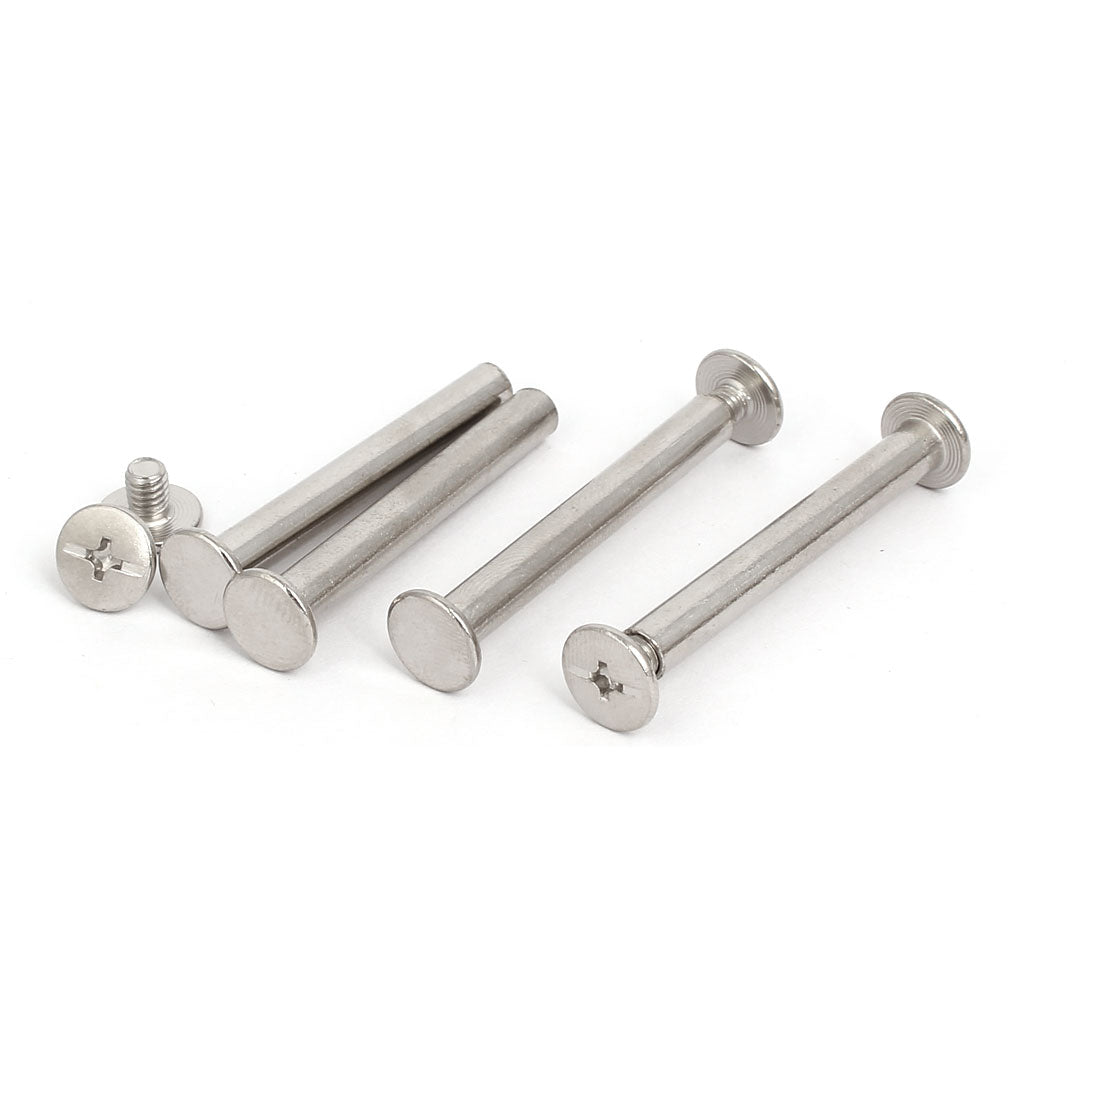 uxcell Uxcell 5mmx40mm Binding Chicago Screw Posts Barrel Nuts Docking Rivets Silver Tone 4pcs